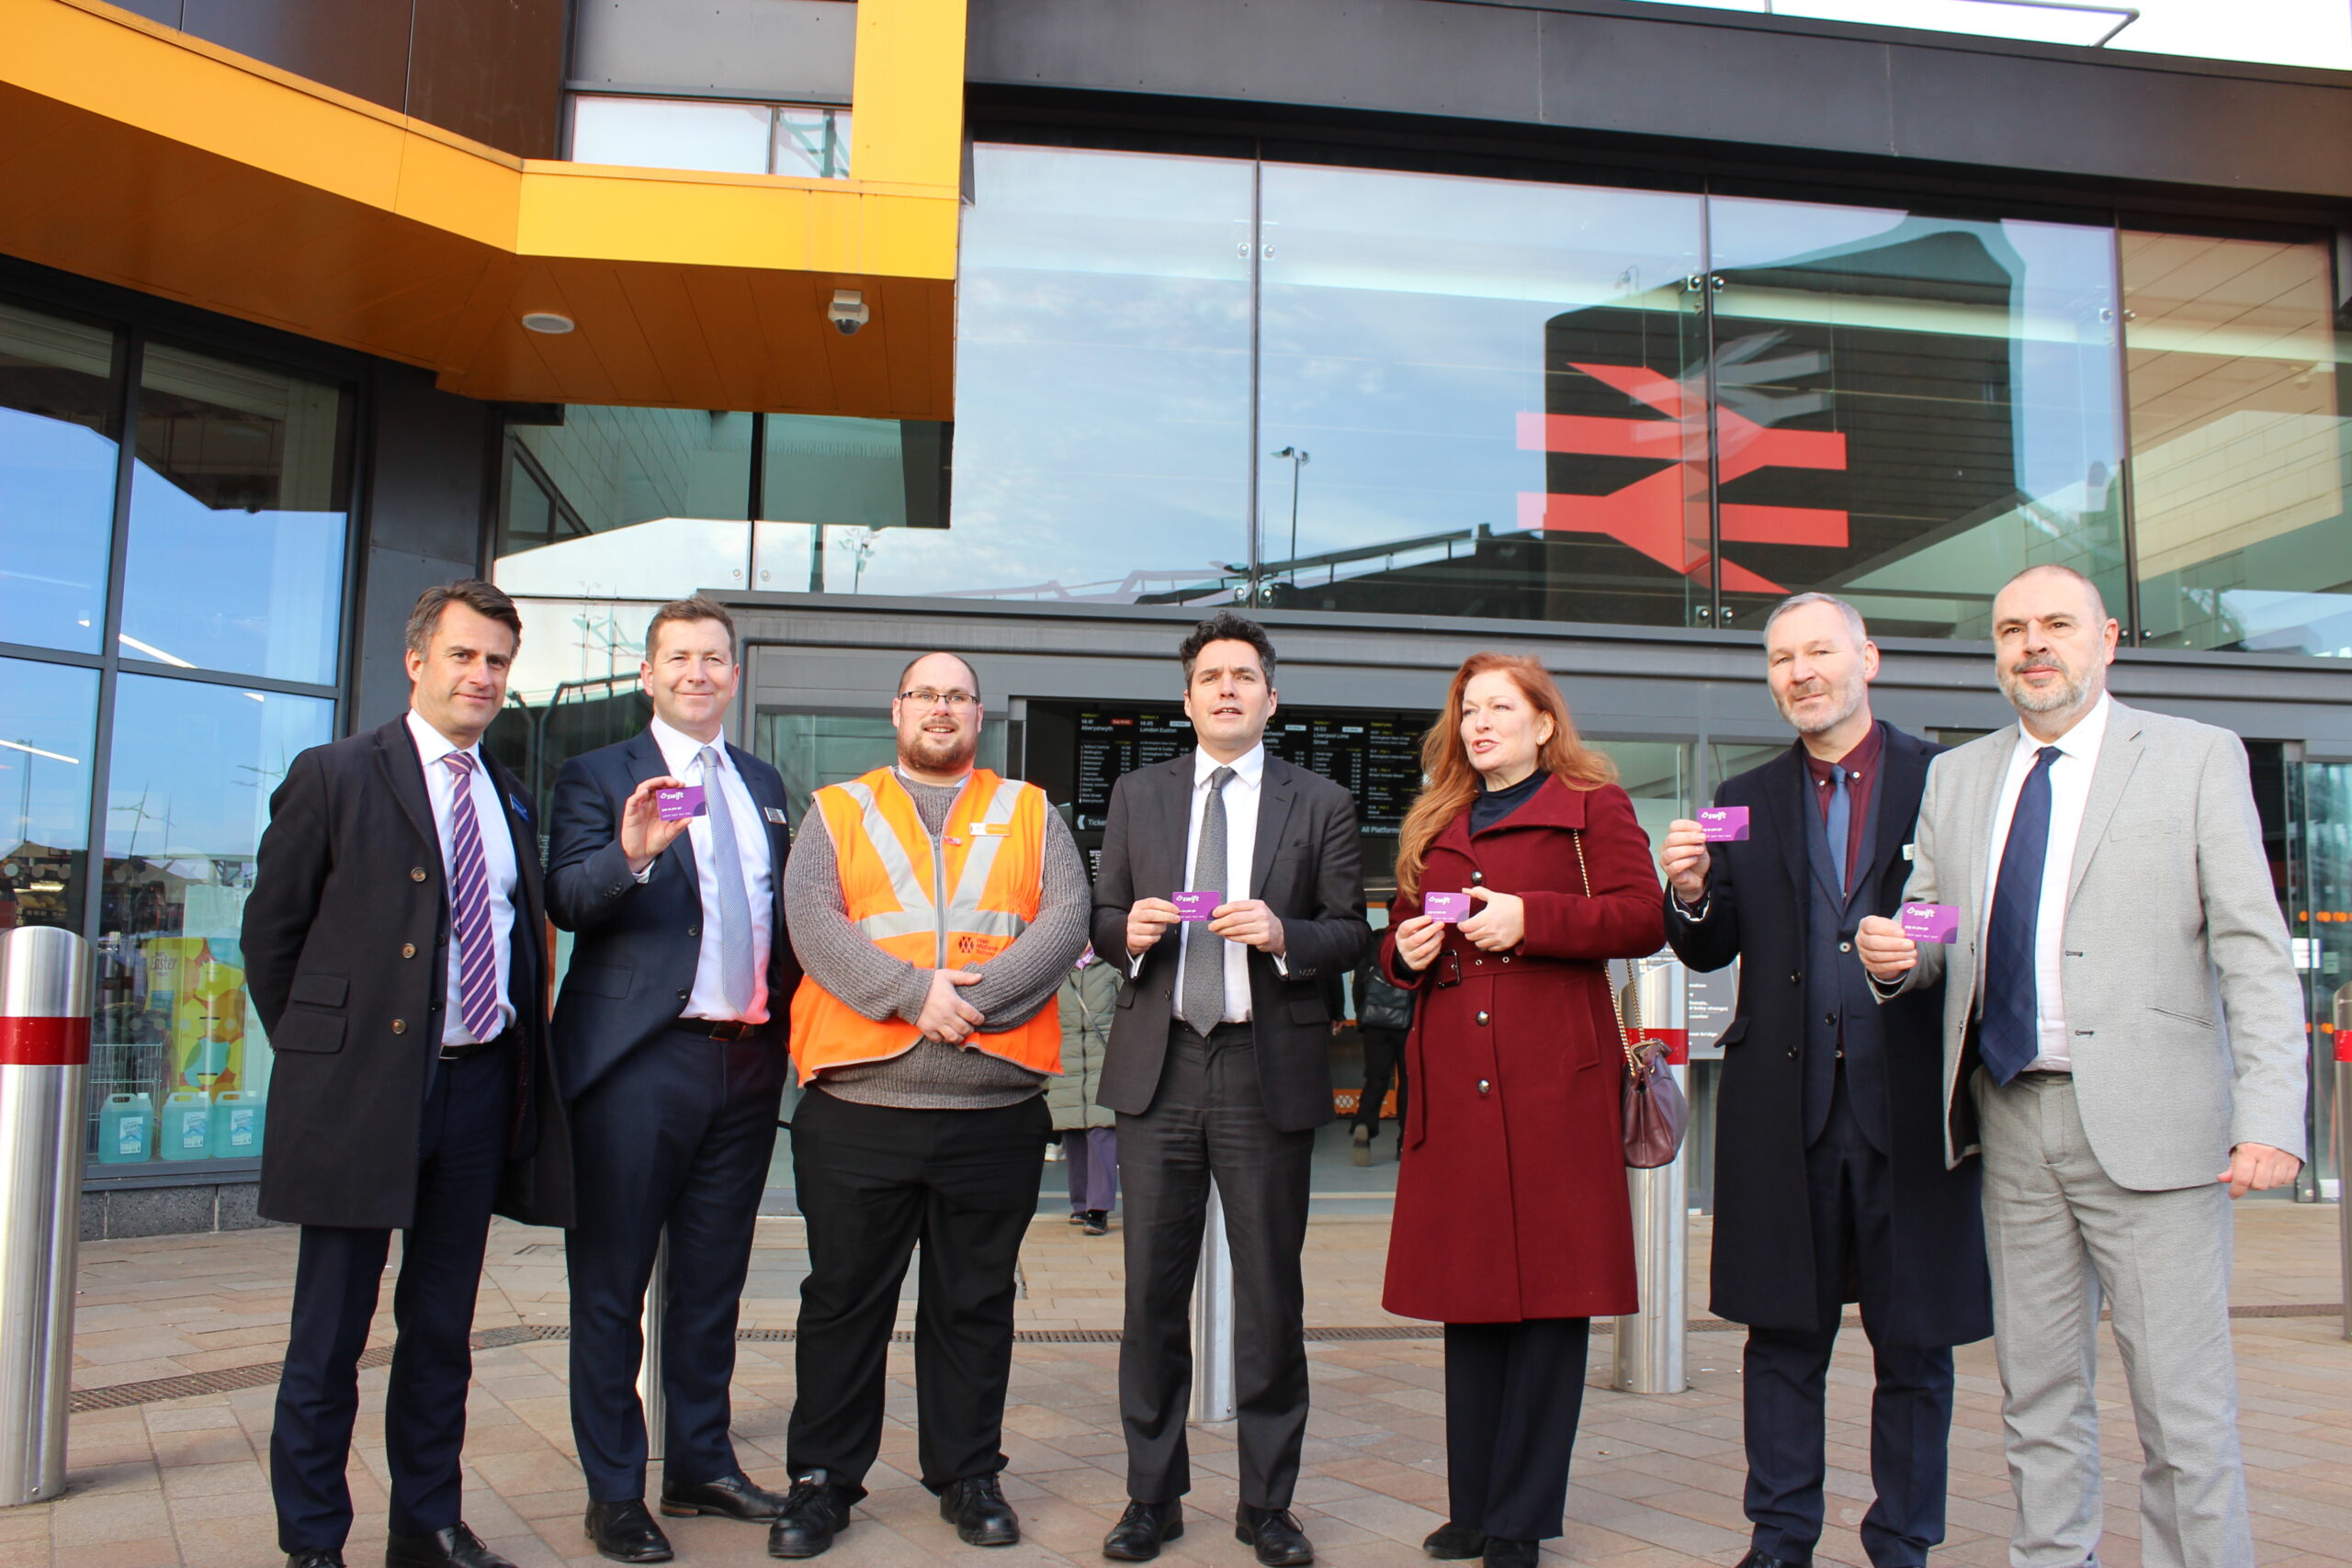 Photo of Stewart Fox-Mills (GBRTT), Ian McConnell (West Midlands Trains), David Collyer (West Midlands Trains), Rail Minister Huw Merriman MP, Jane Stevenson MP, Mal Drury-Rose (WMRE / TfWM) and Cllr Craig Collingswood (WMRE / City of Wolverhampton Council). Photo courtesy of WMCA.